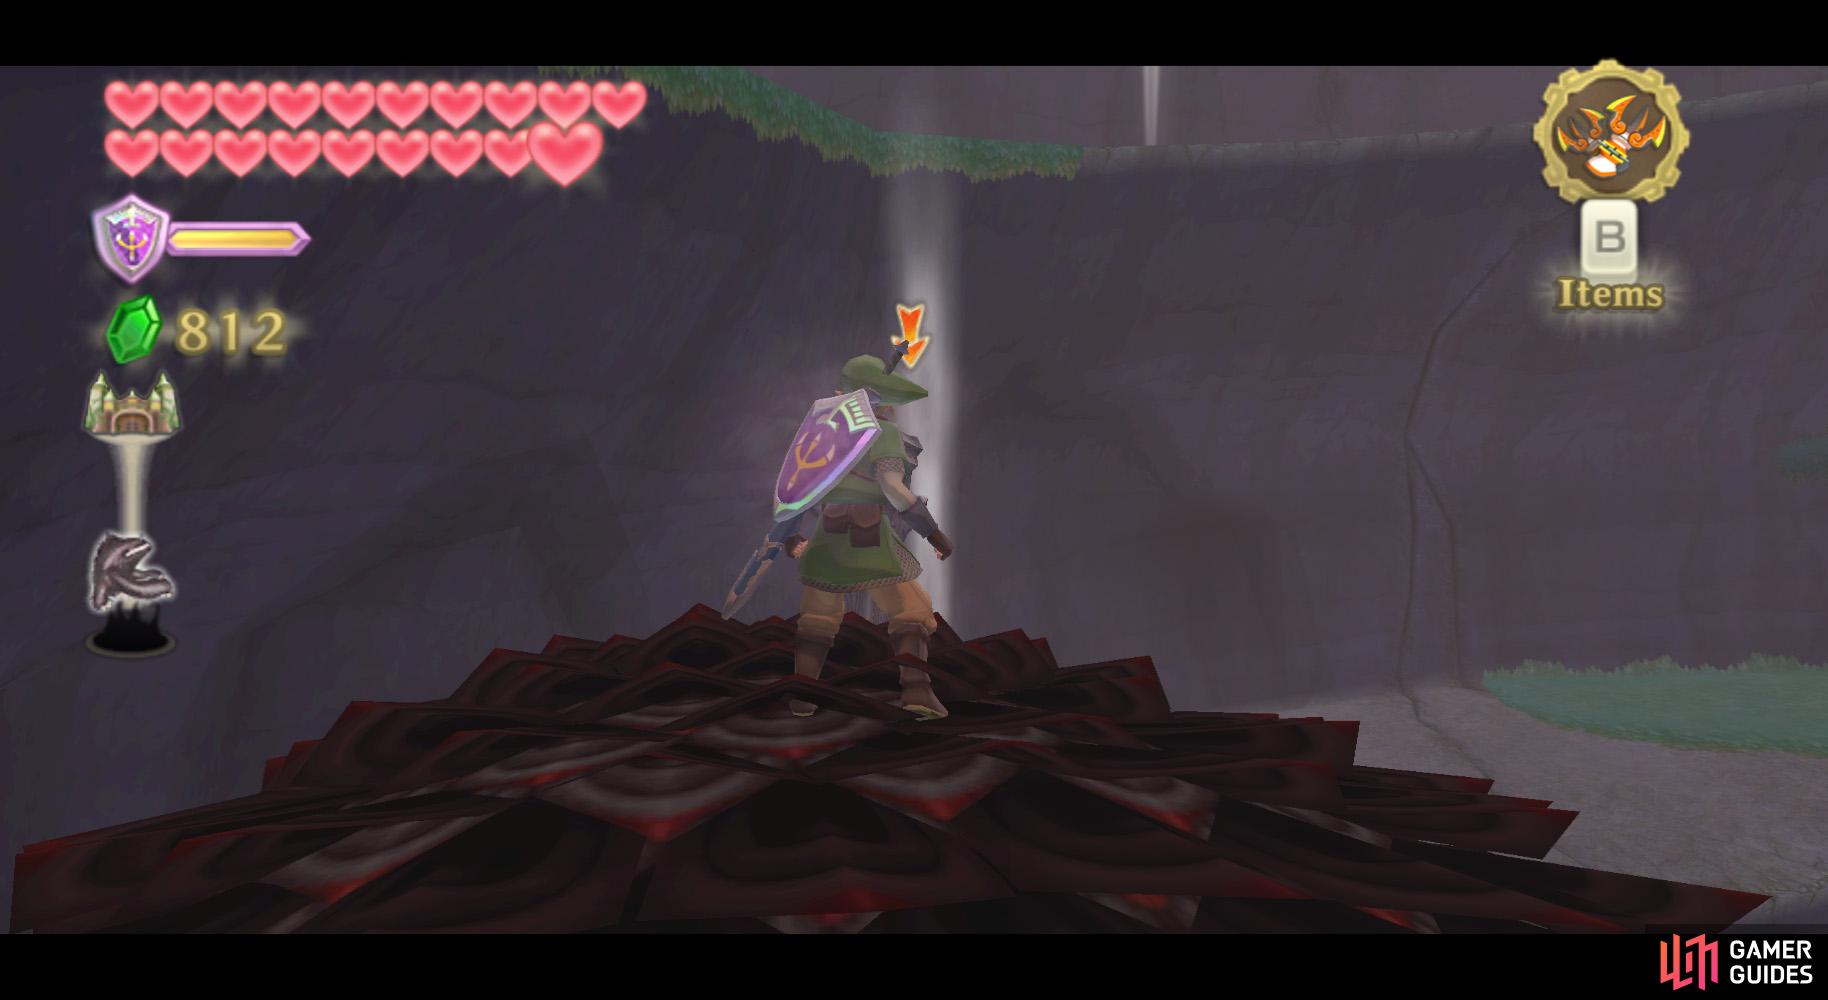 After hitting it with Groose's bomb, carefully jump on its head and hit the stone spike from there.